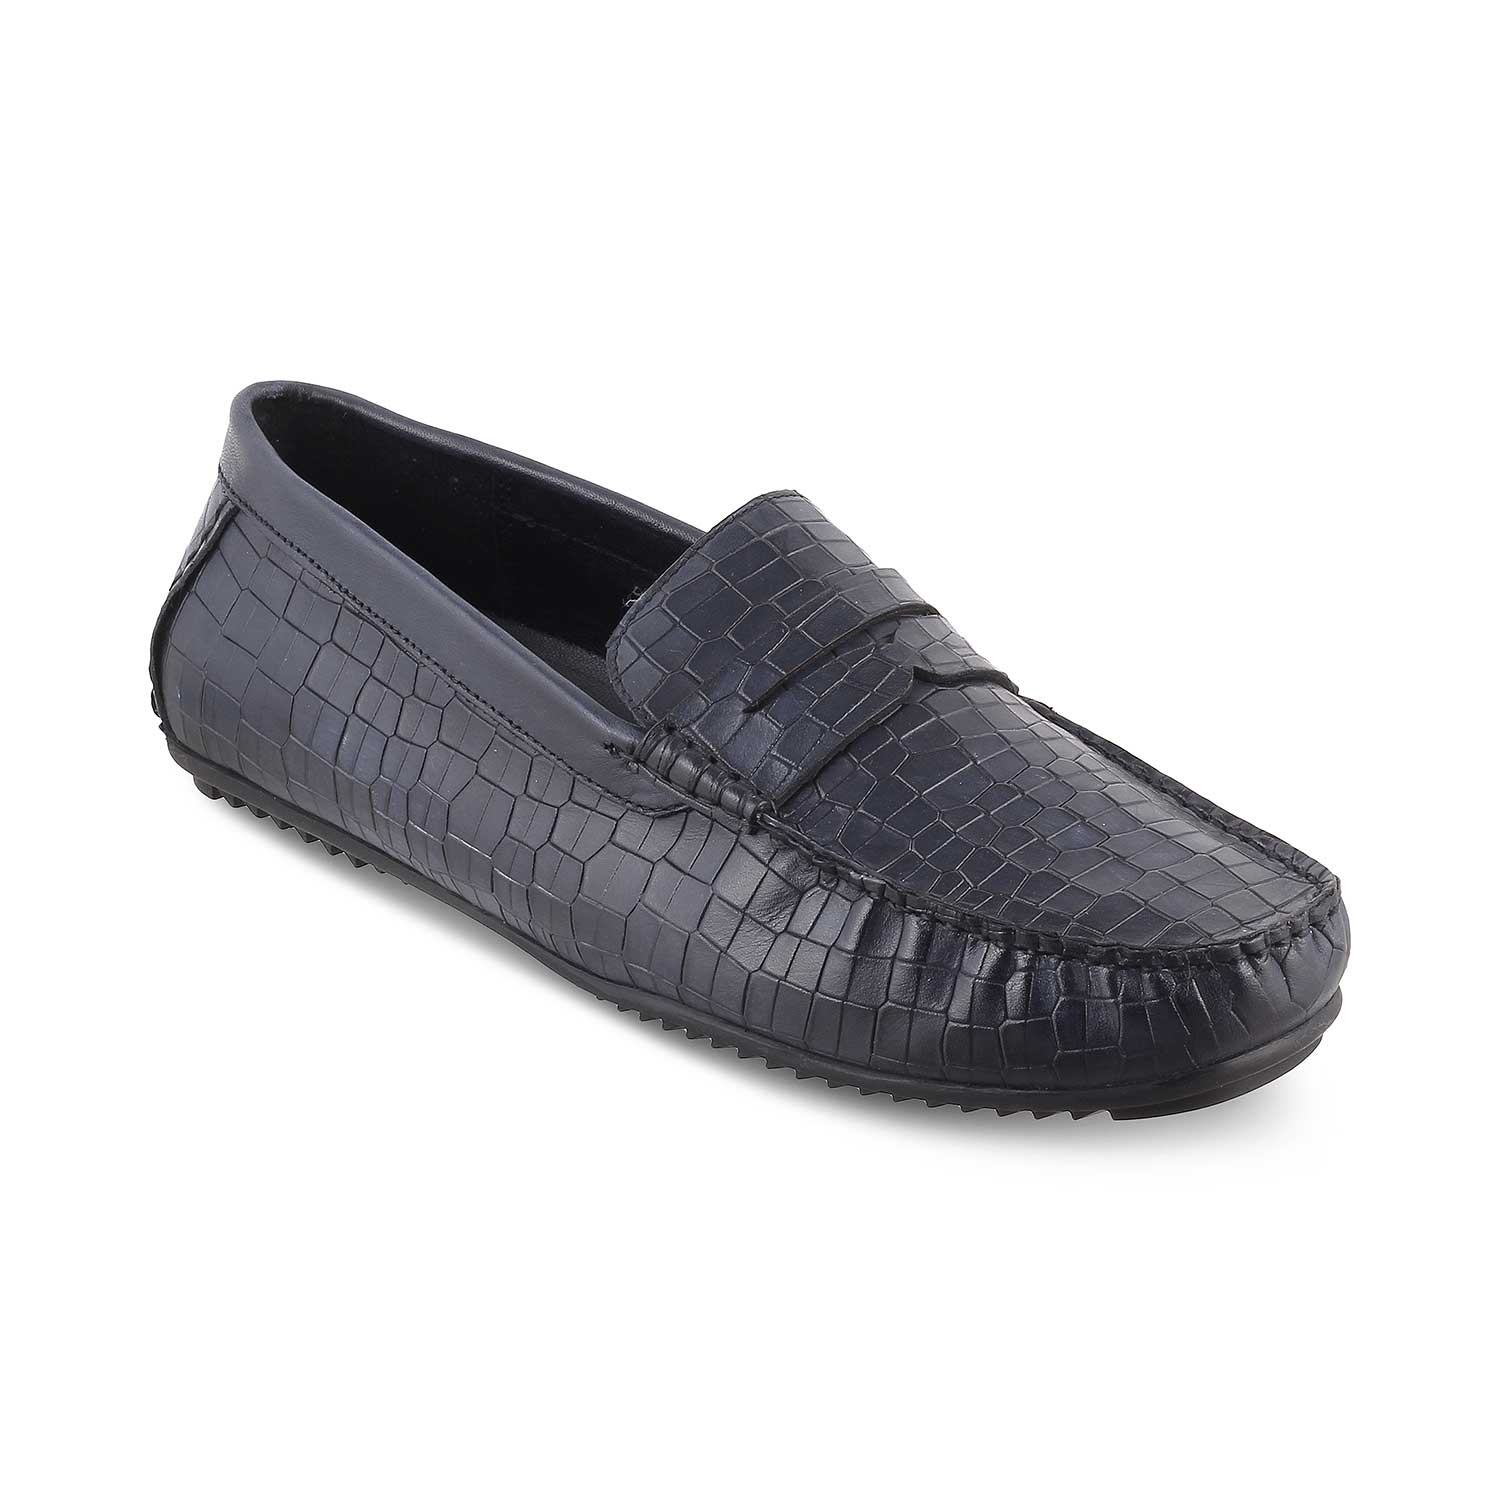 The Avyo Blue Men's Leather Loafers Tresmode - Tresmode